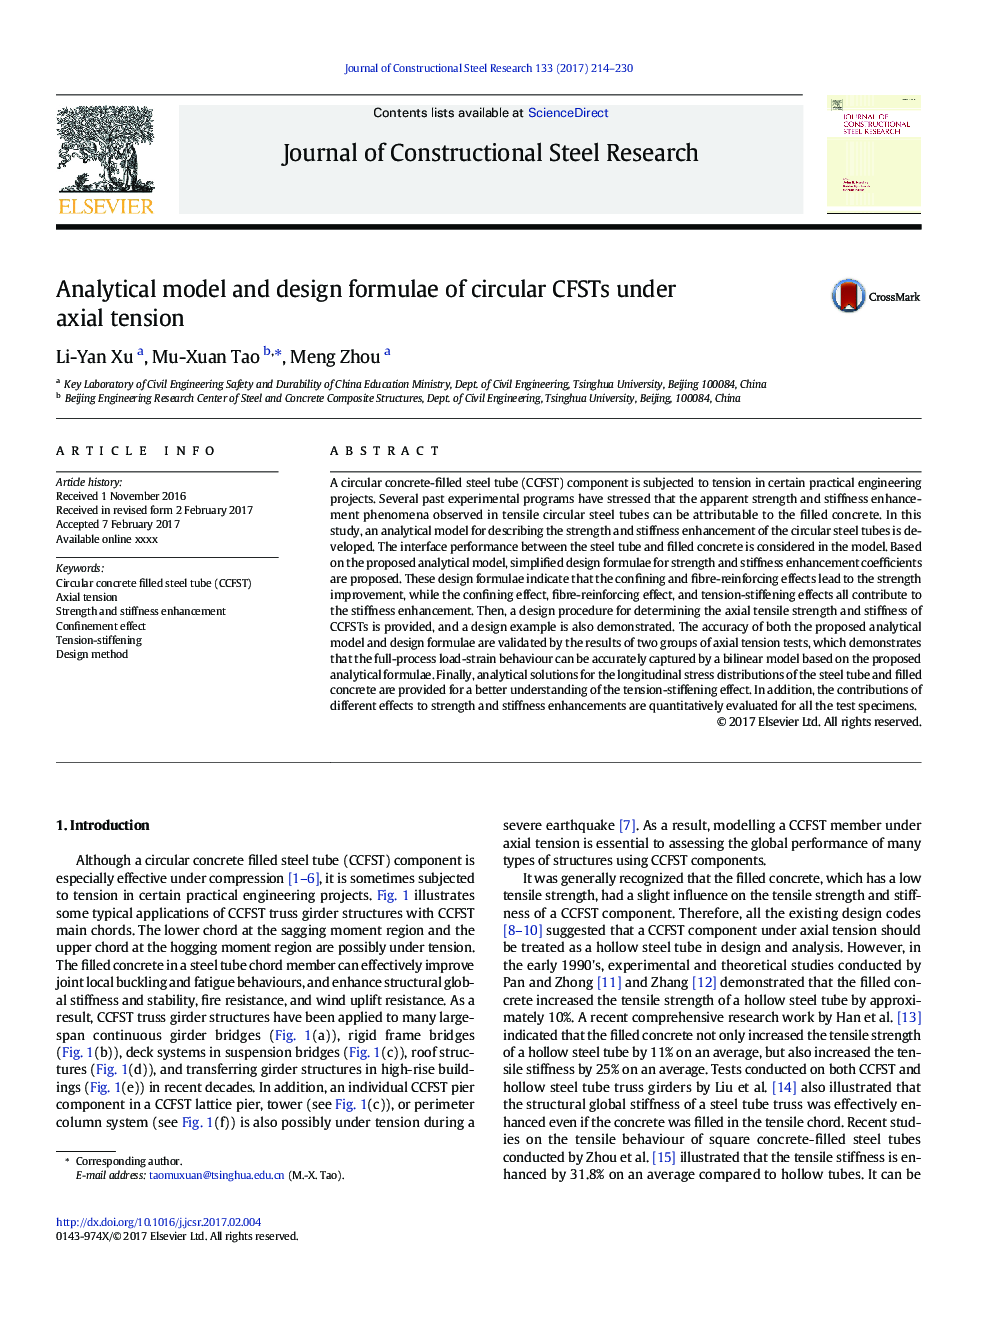 Analytical model and design formulae of circular CFSTs under axial tension